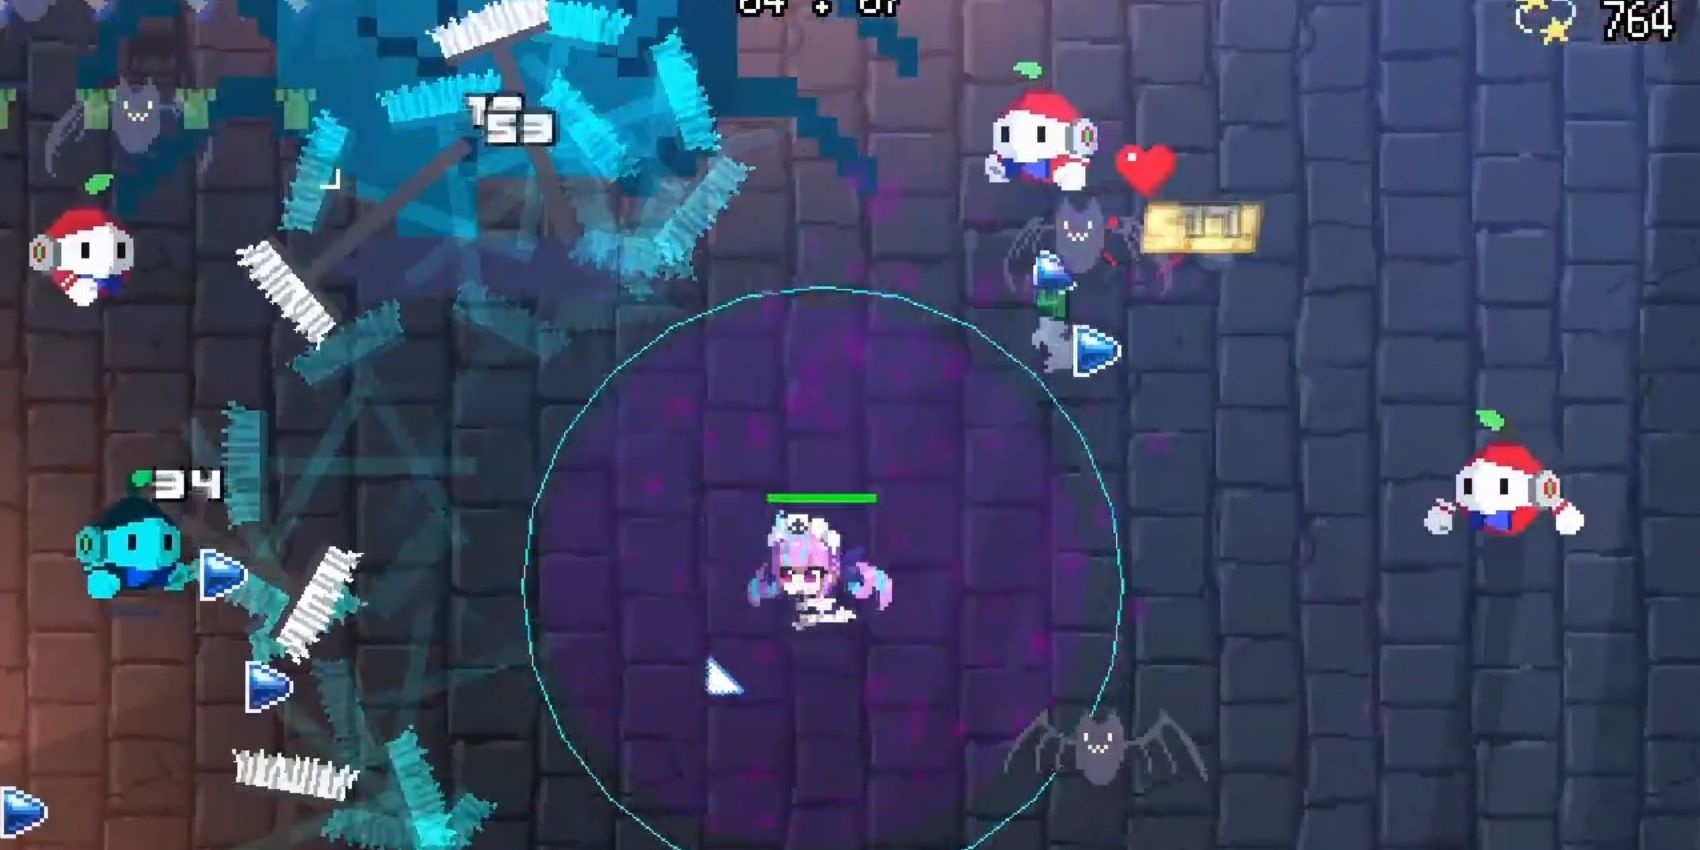 Aqua stands in the purple area generated by Spider Cooking. She throws several brooms at approaching enemies